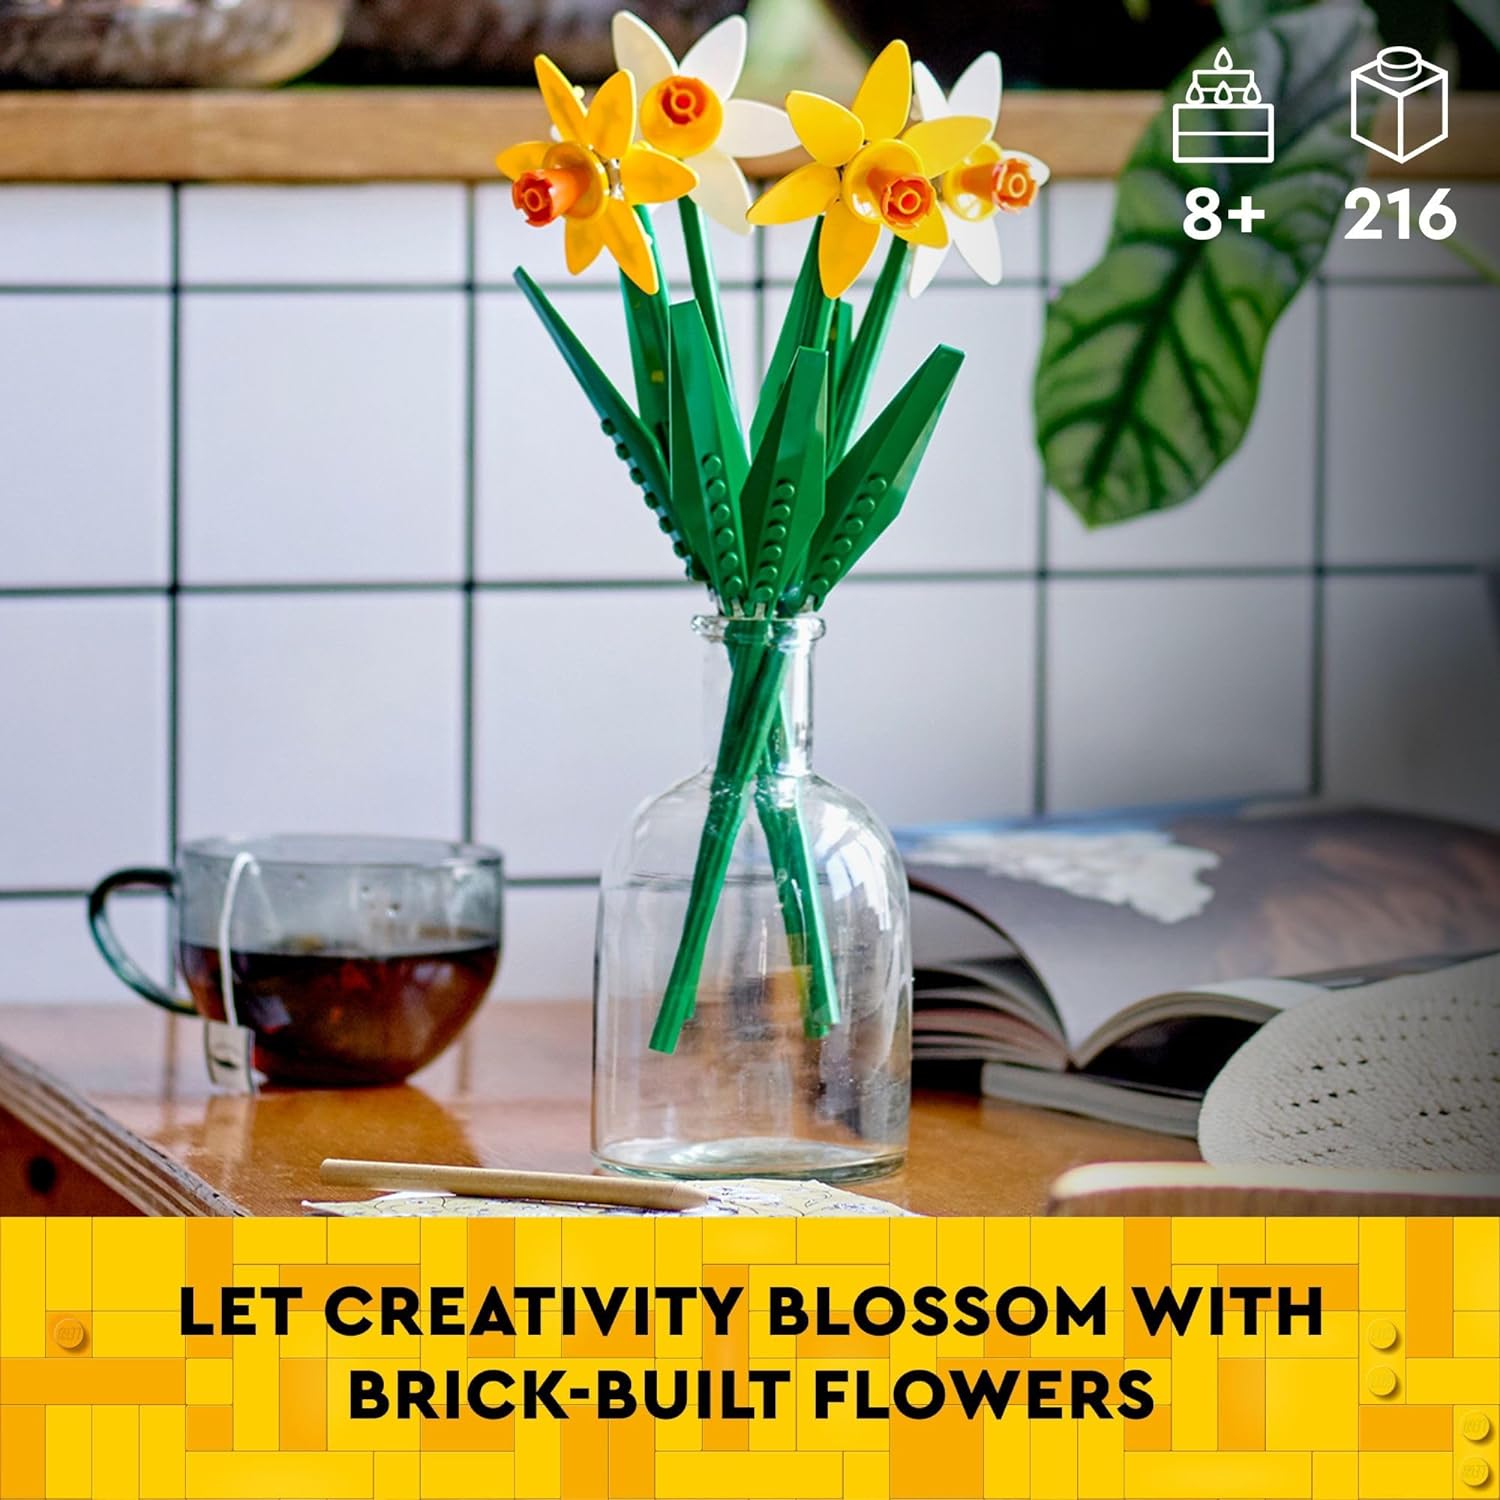 LEGO 40747 Daffodils Celebration Gift, Yellow and White Daffodils, Spring Flower Room Decor, Great Gift for Flower Lovers,